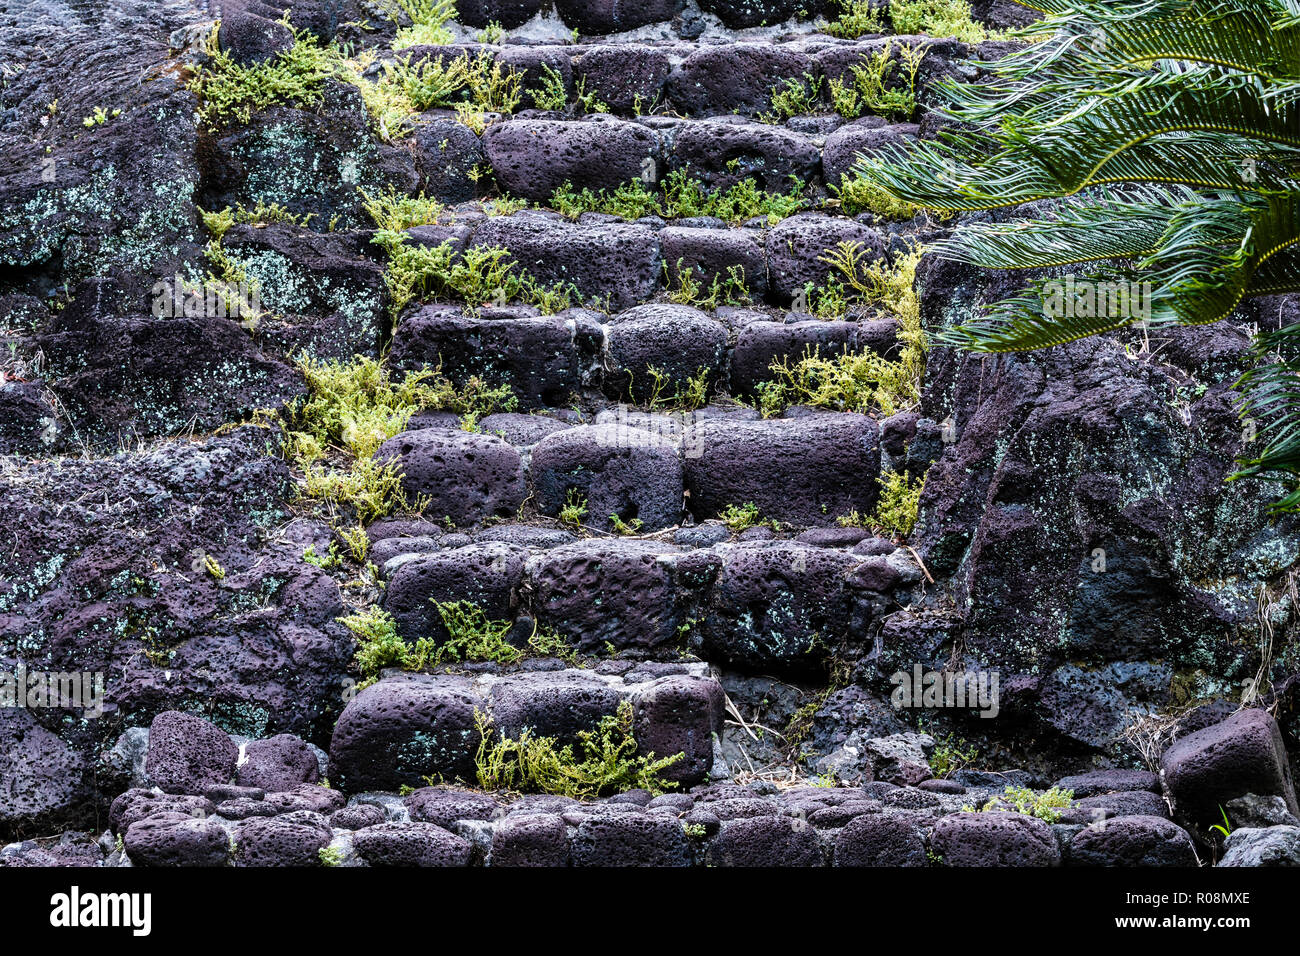 Stairs made from local volcanic rock in Hilo, Hawaii. Stones are weathered and rounded; ferns starting to grow in the cracks. Palm tree to the right o Stock Photo